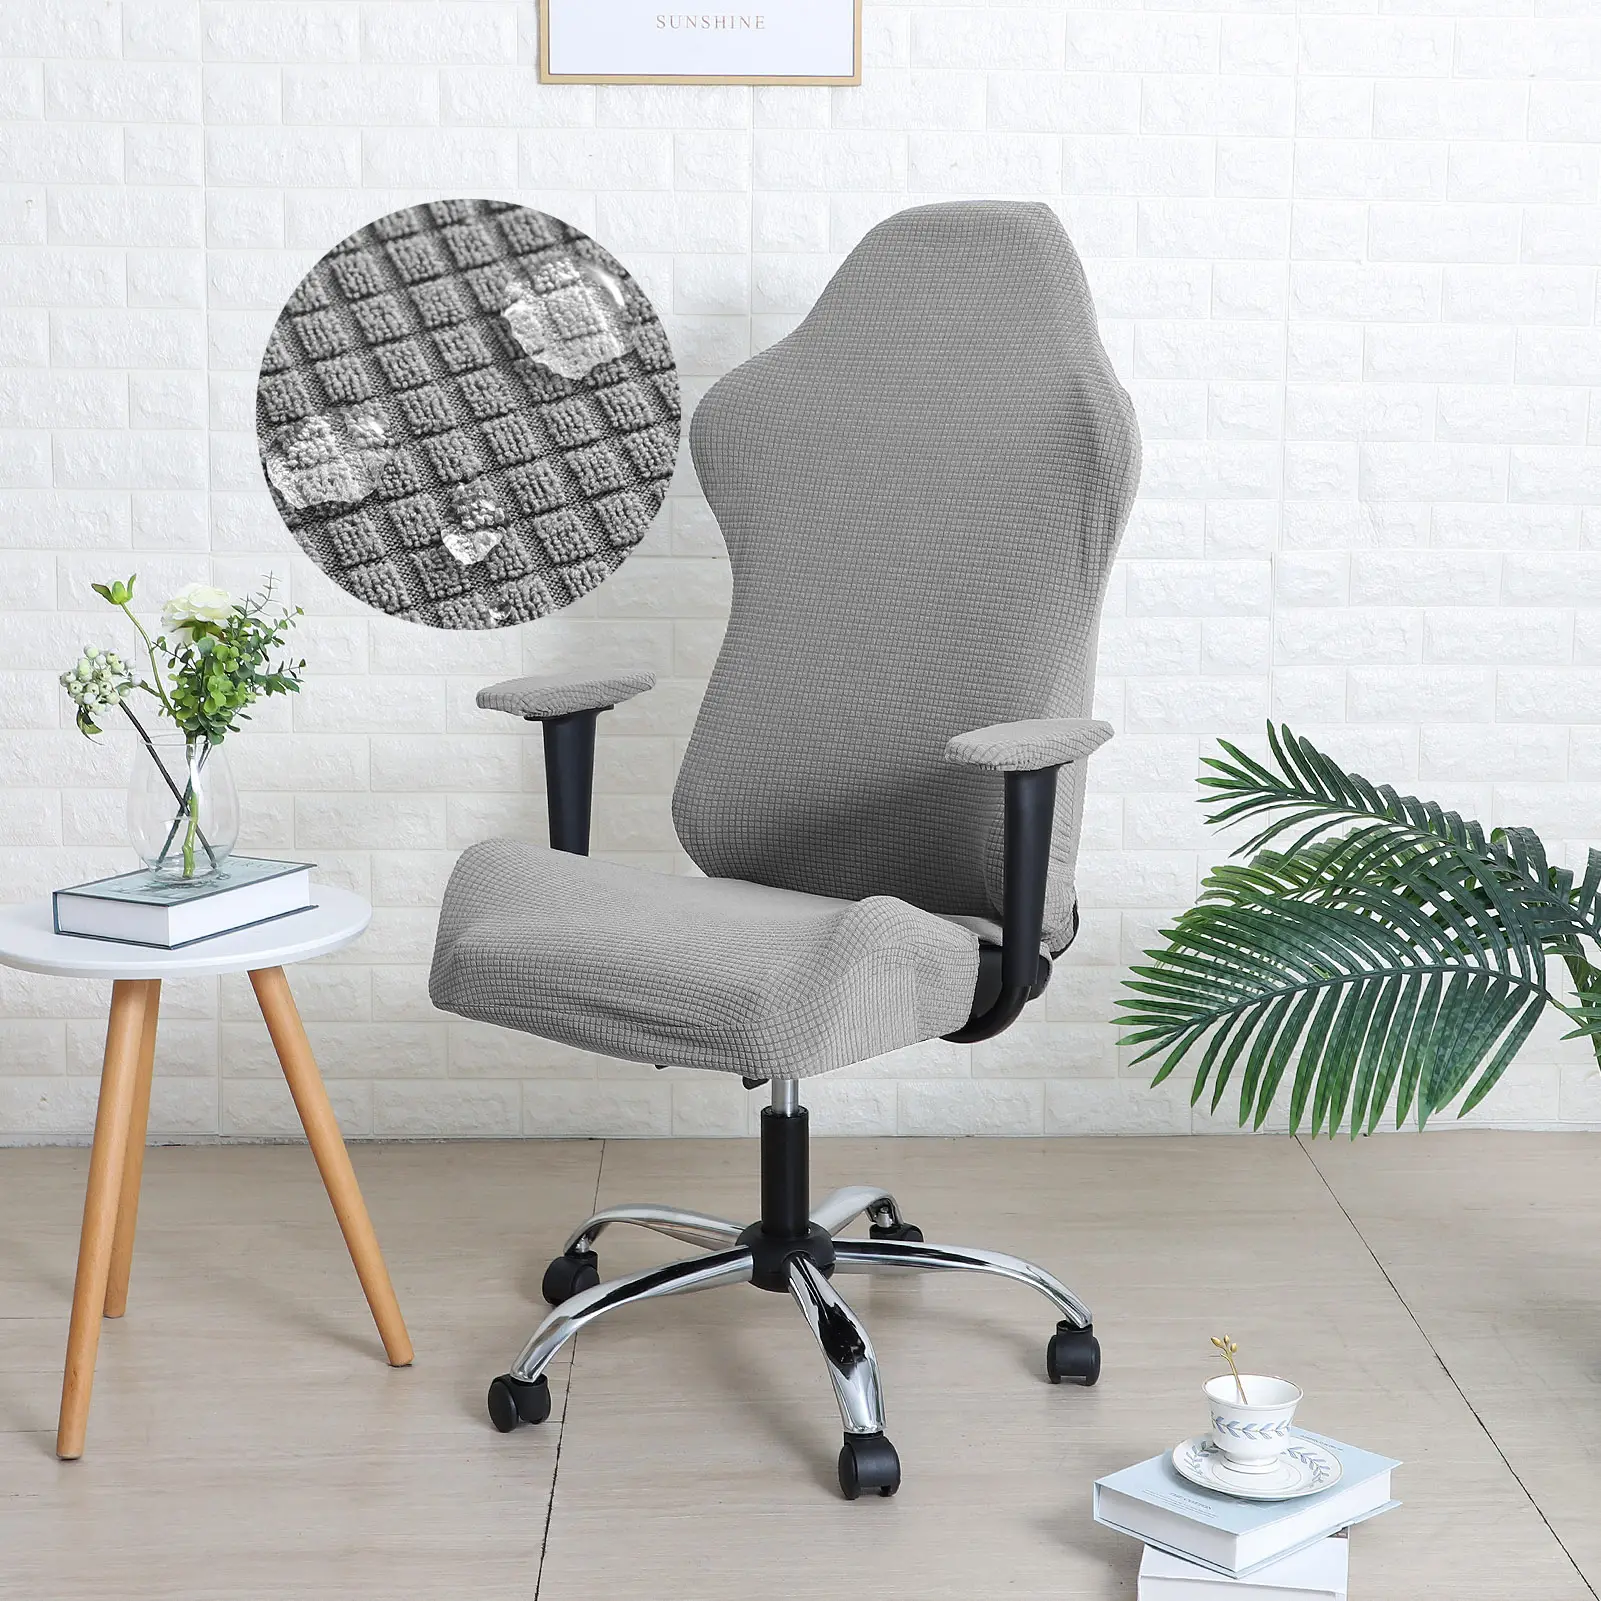 Hot Chair Cover Pure Color Office Work Swivel Chair Seat Stretchy Slipcover 1Set 